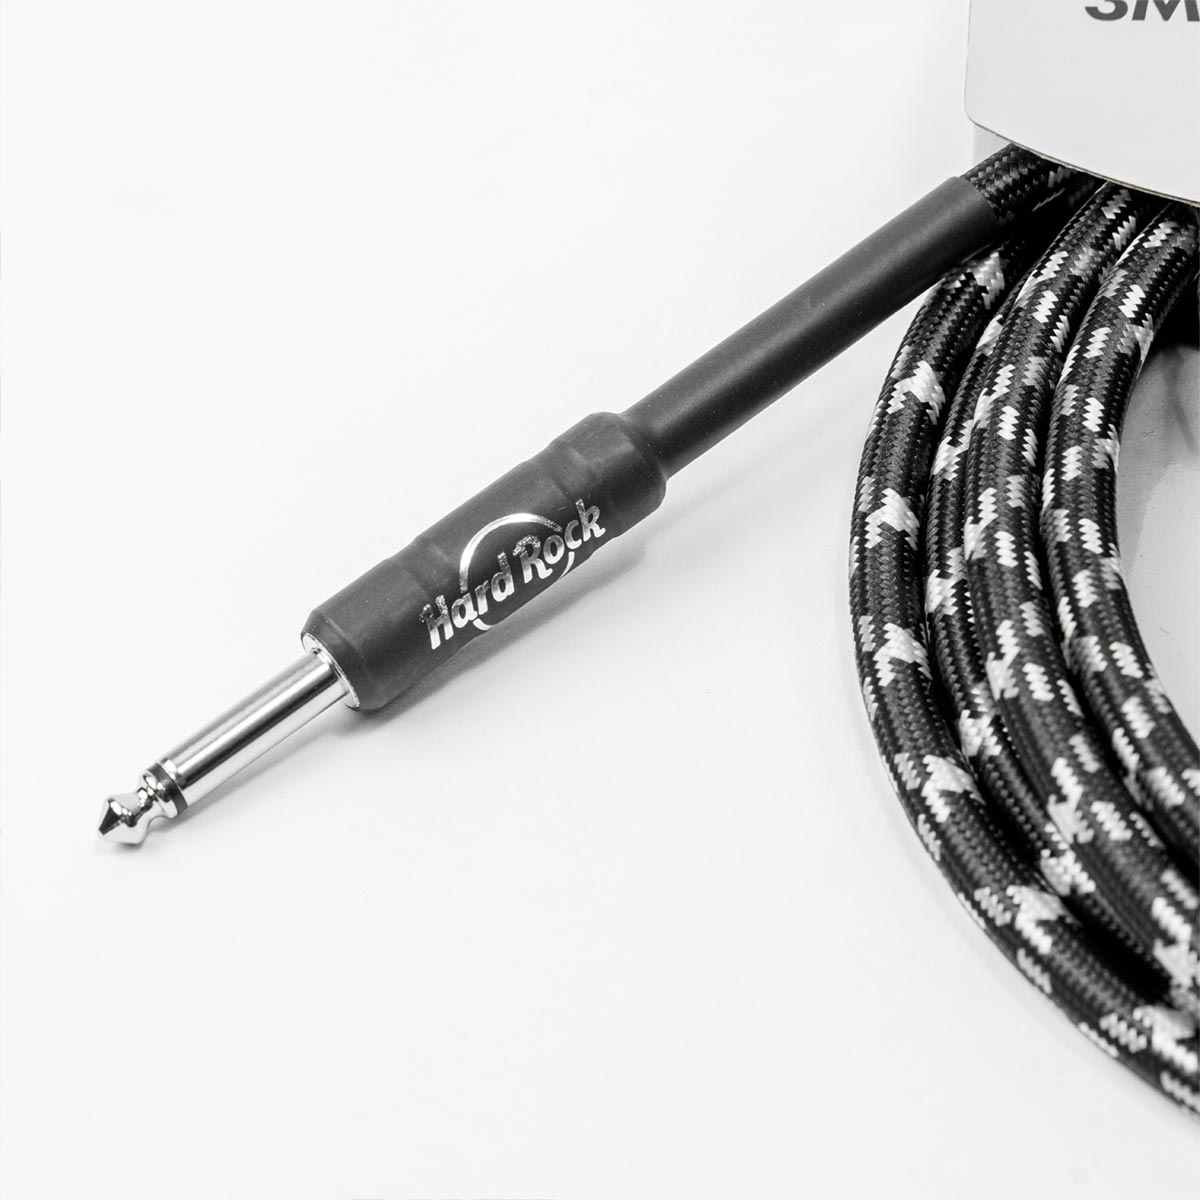 Fender x Hard Rock Instrument Cable 10 Foot in Black Tweed and Camo image number 2